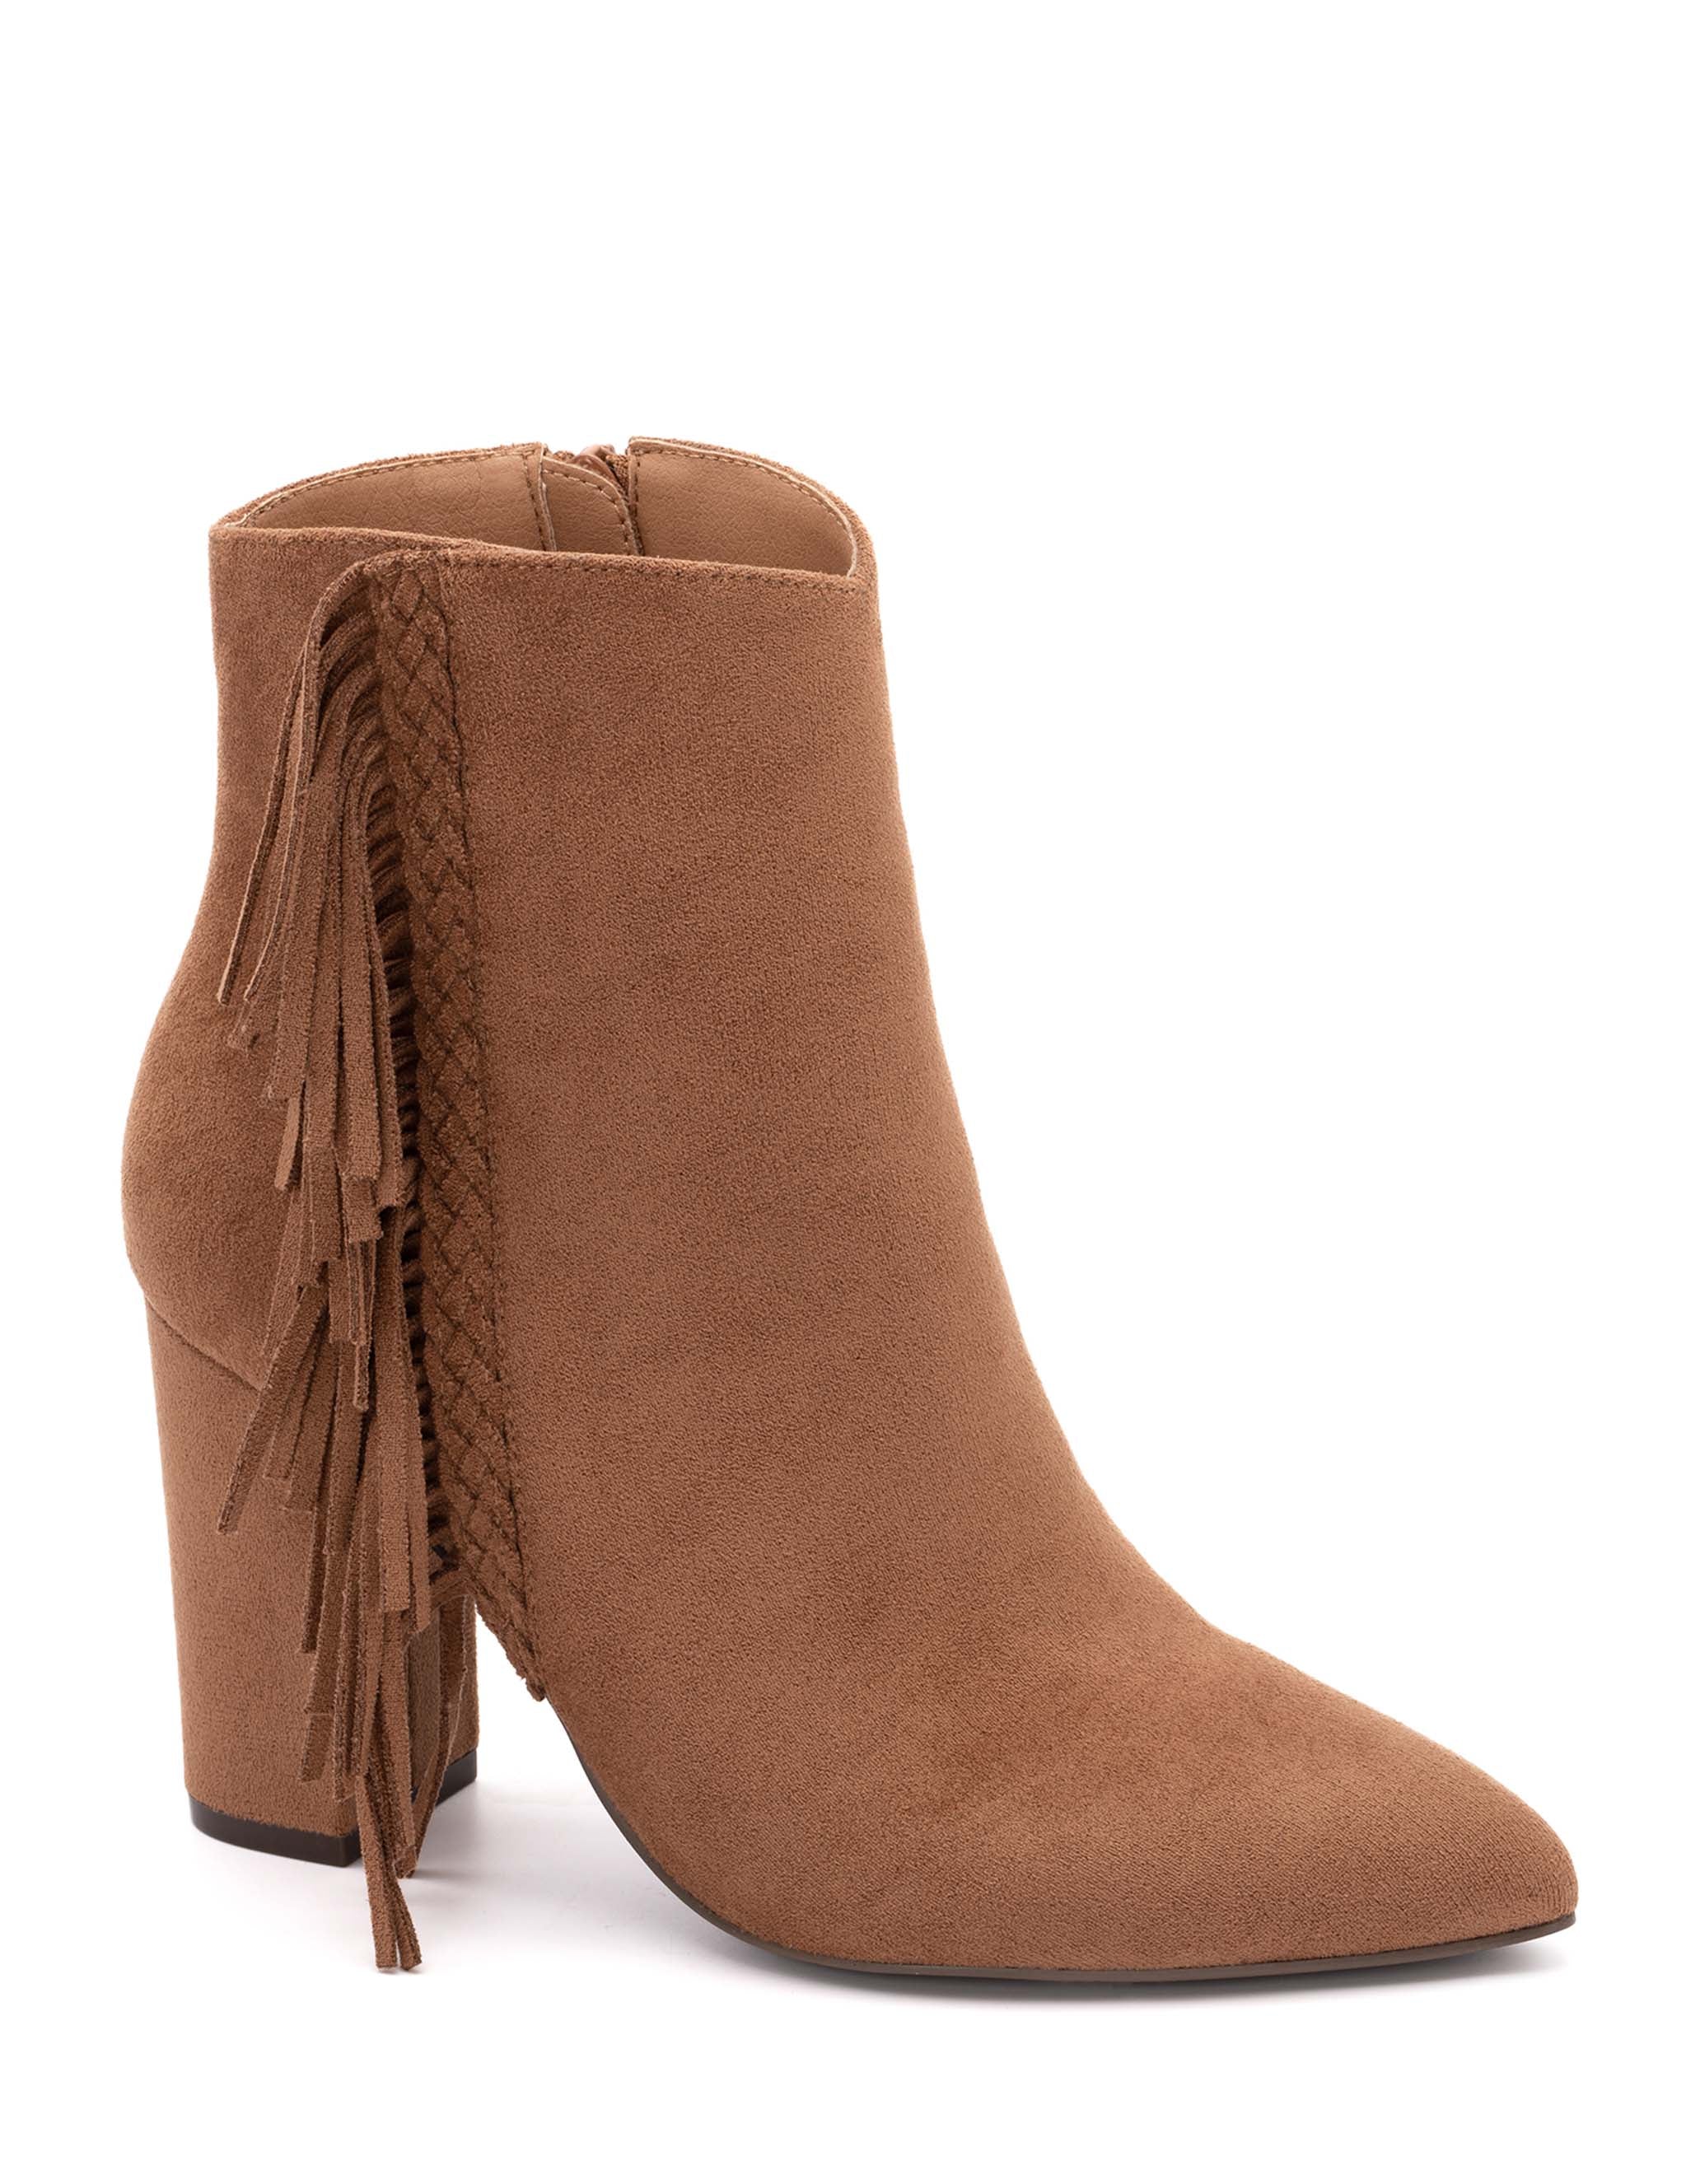 Corky's Westbound Fringe Faux Suede Booties